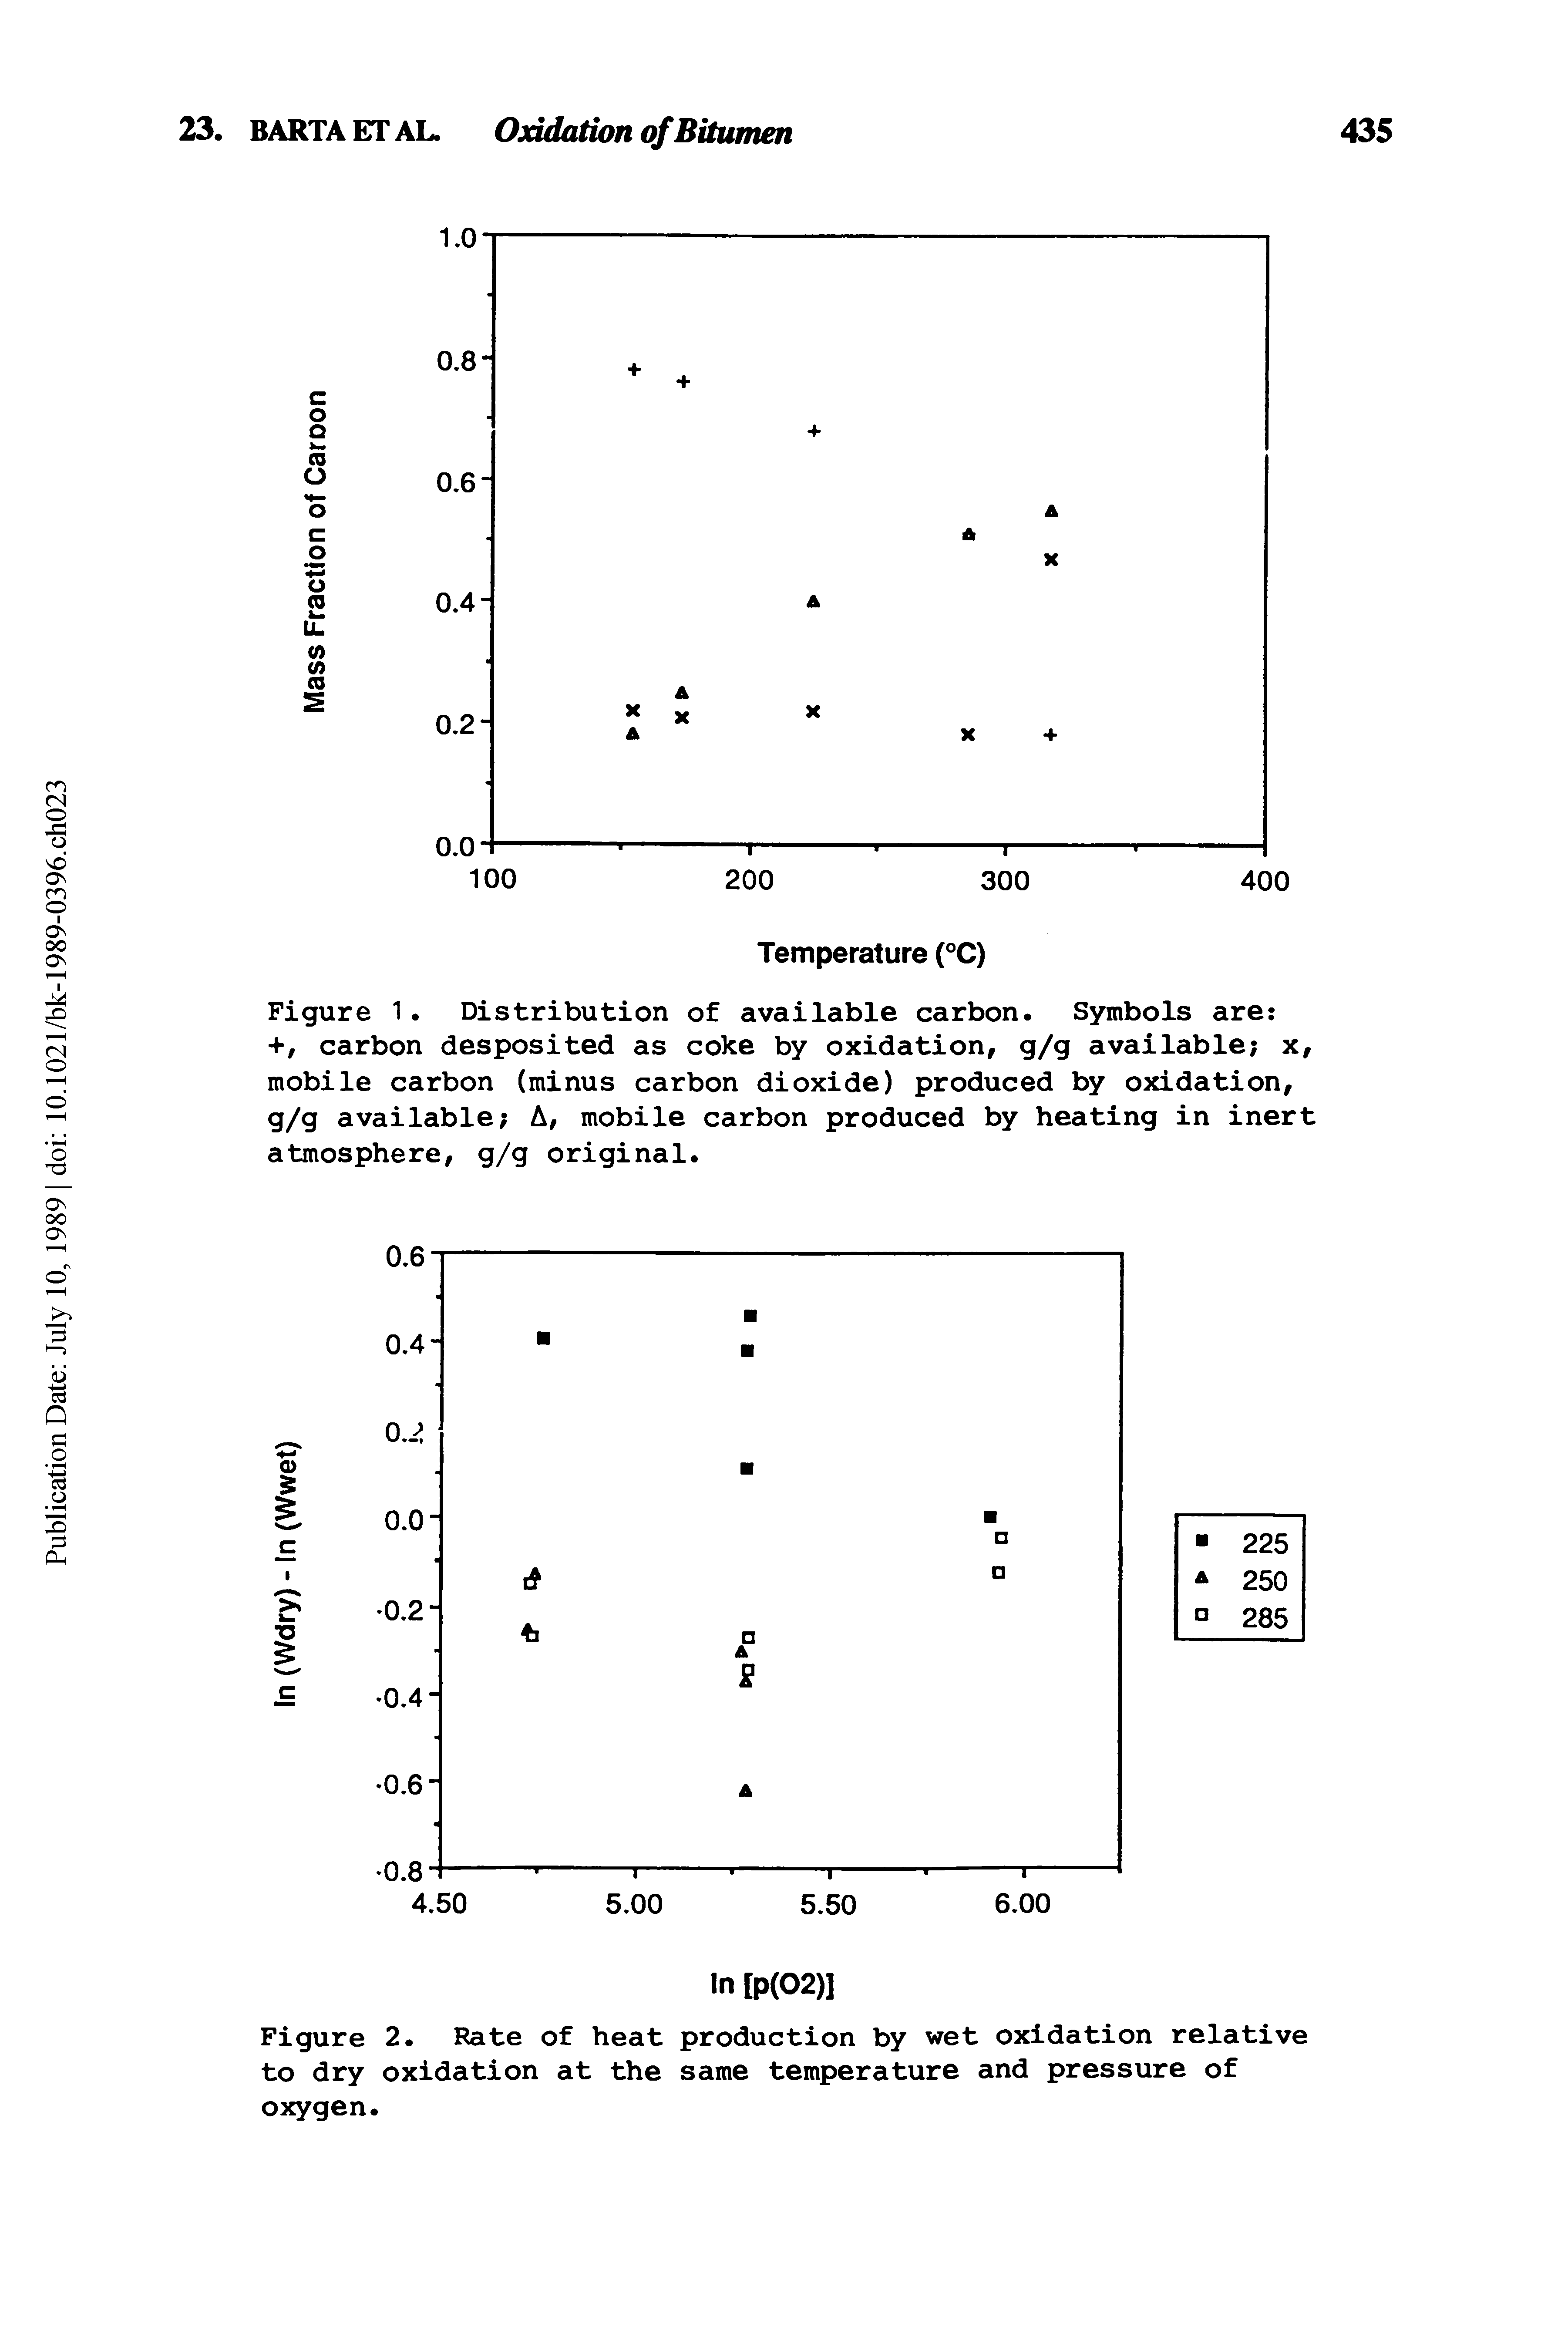 Figure 2. Rate of heat production by wet oxidation relative to dry oxidation at the same temperature and pressure of oxygen.